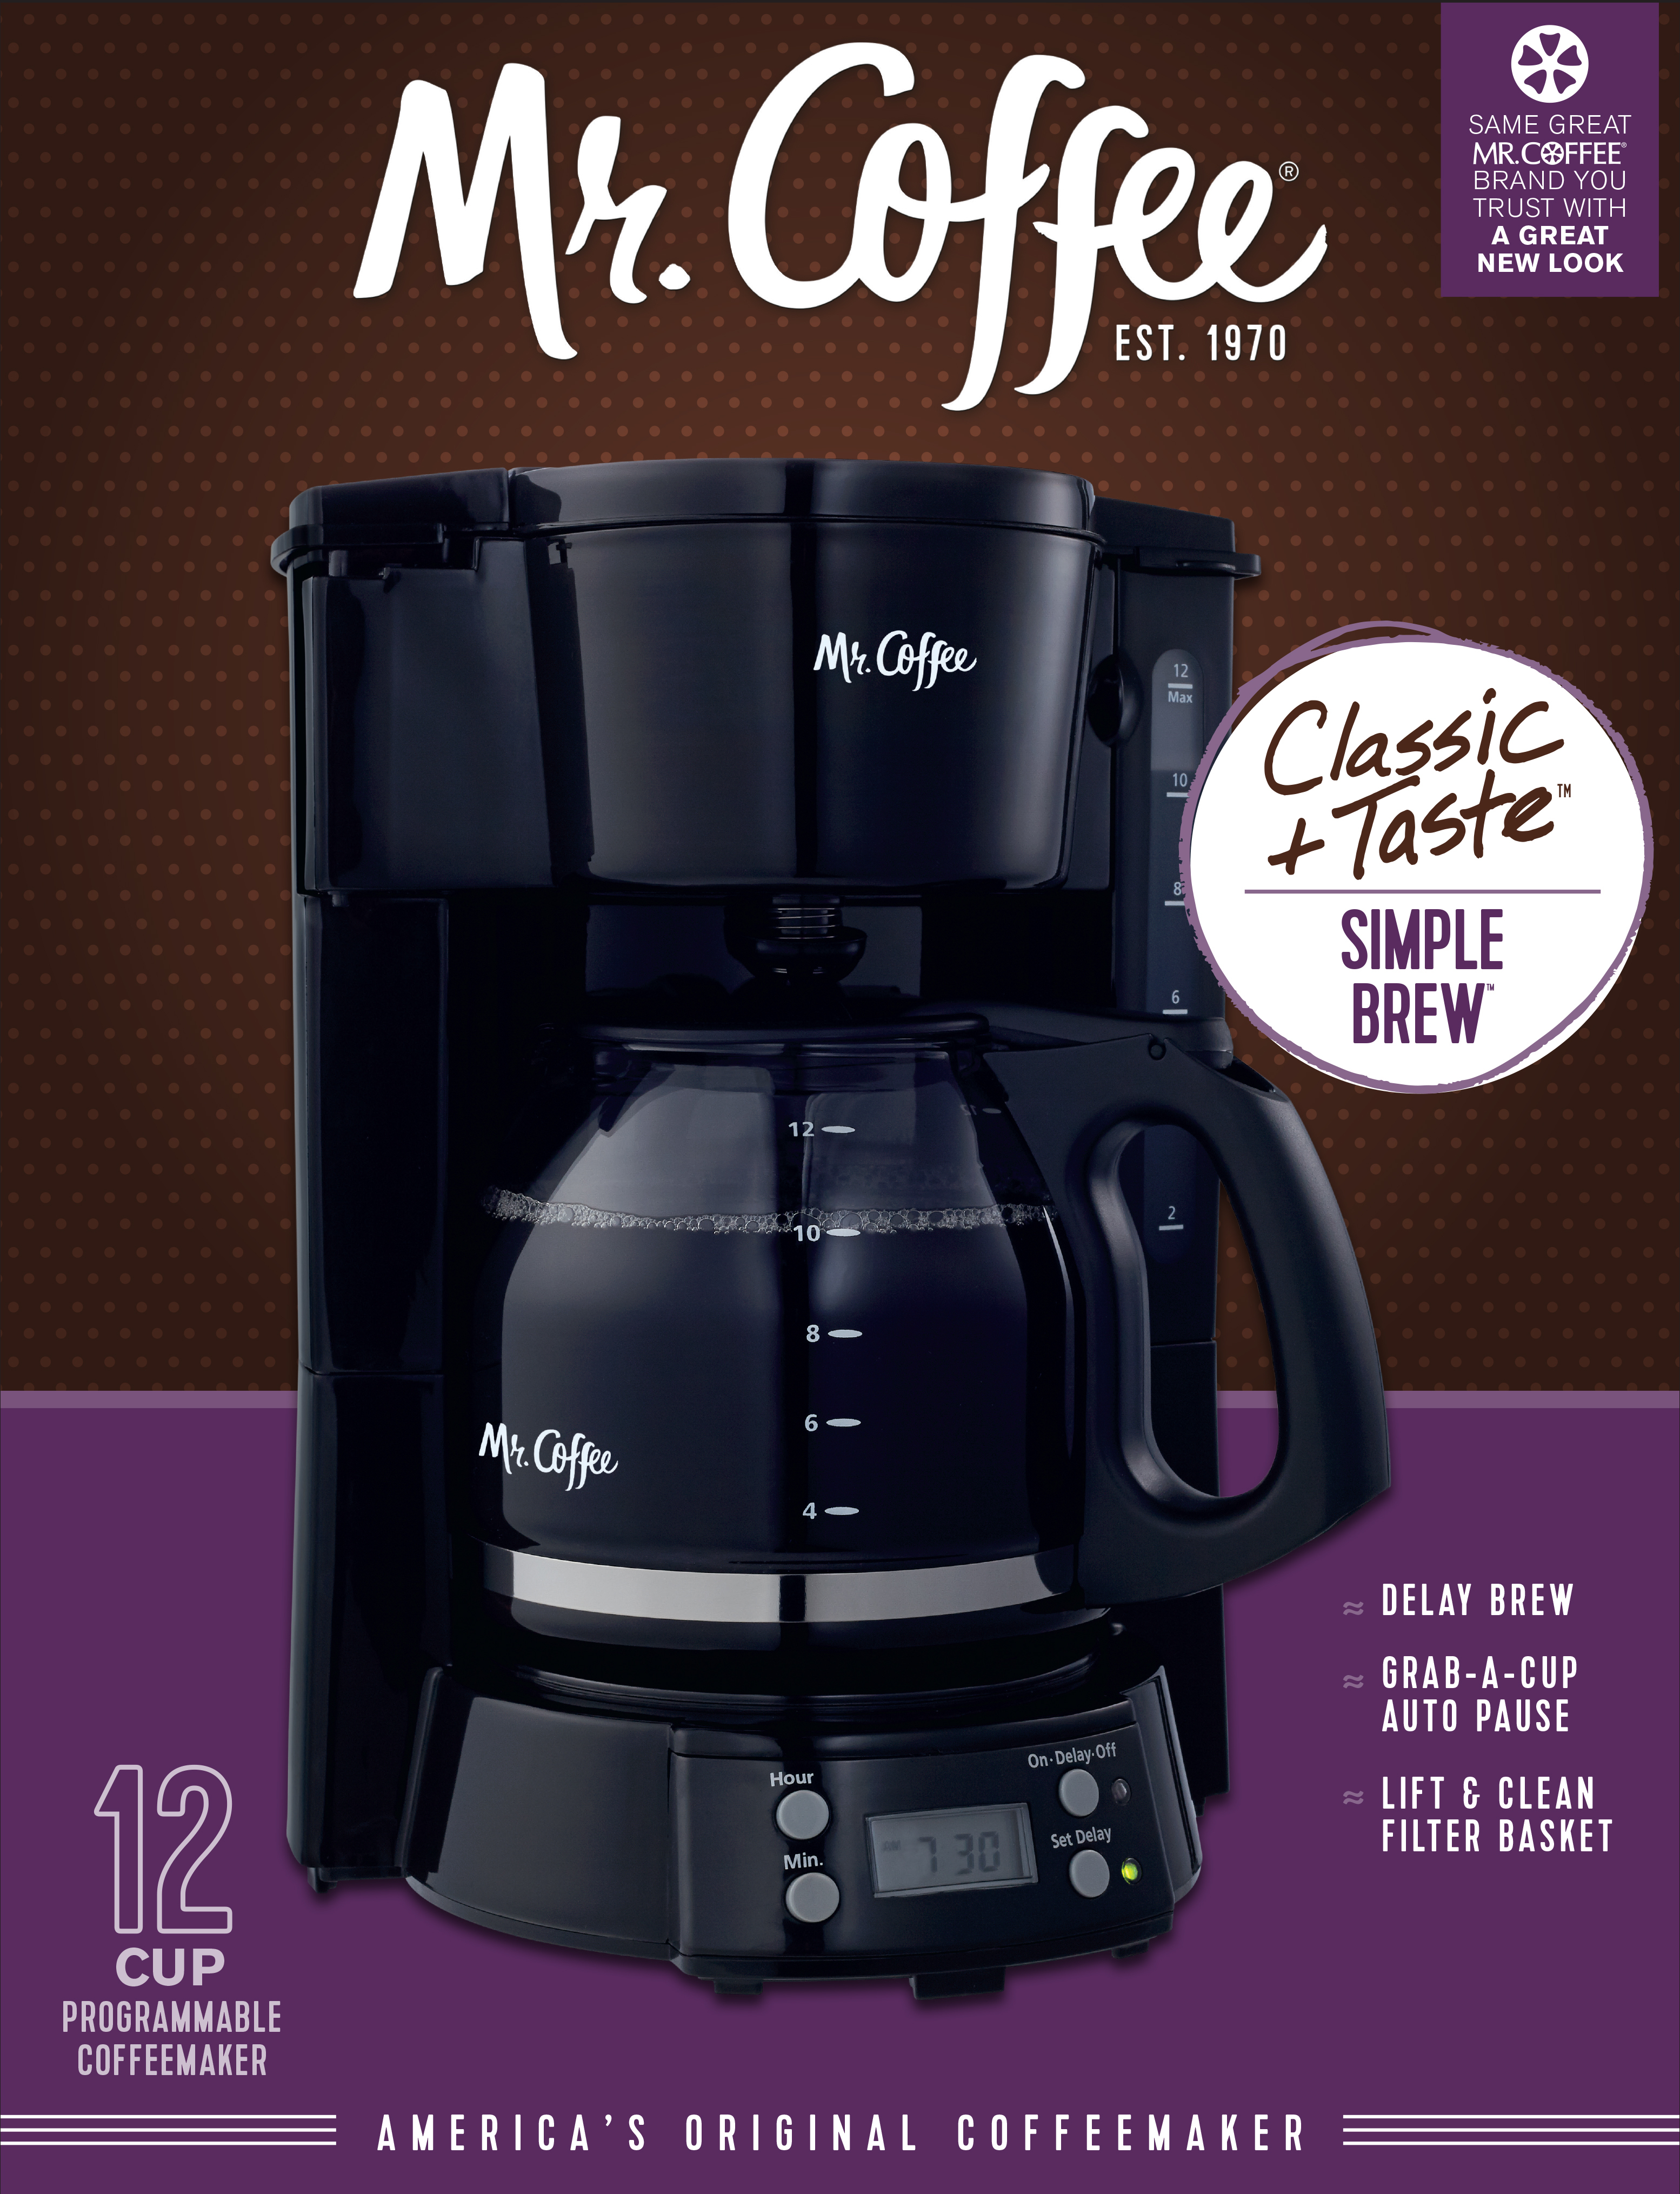 Mr. Coffee 12 Cup Programmable Black Coffee Maker - image 2 of 3